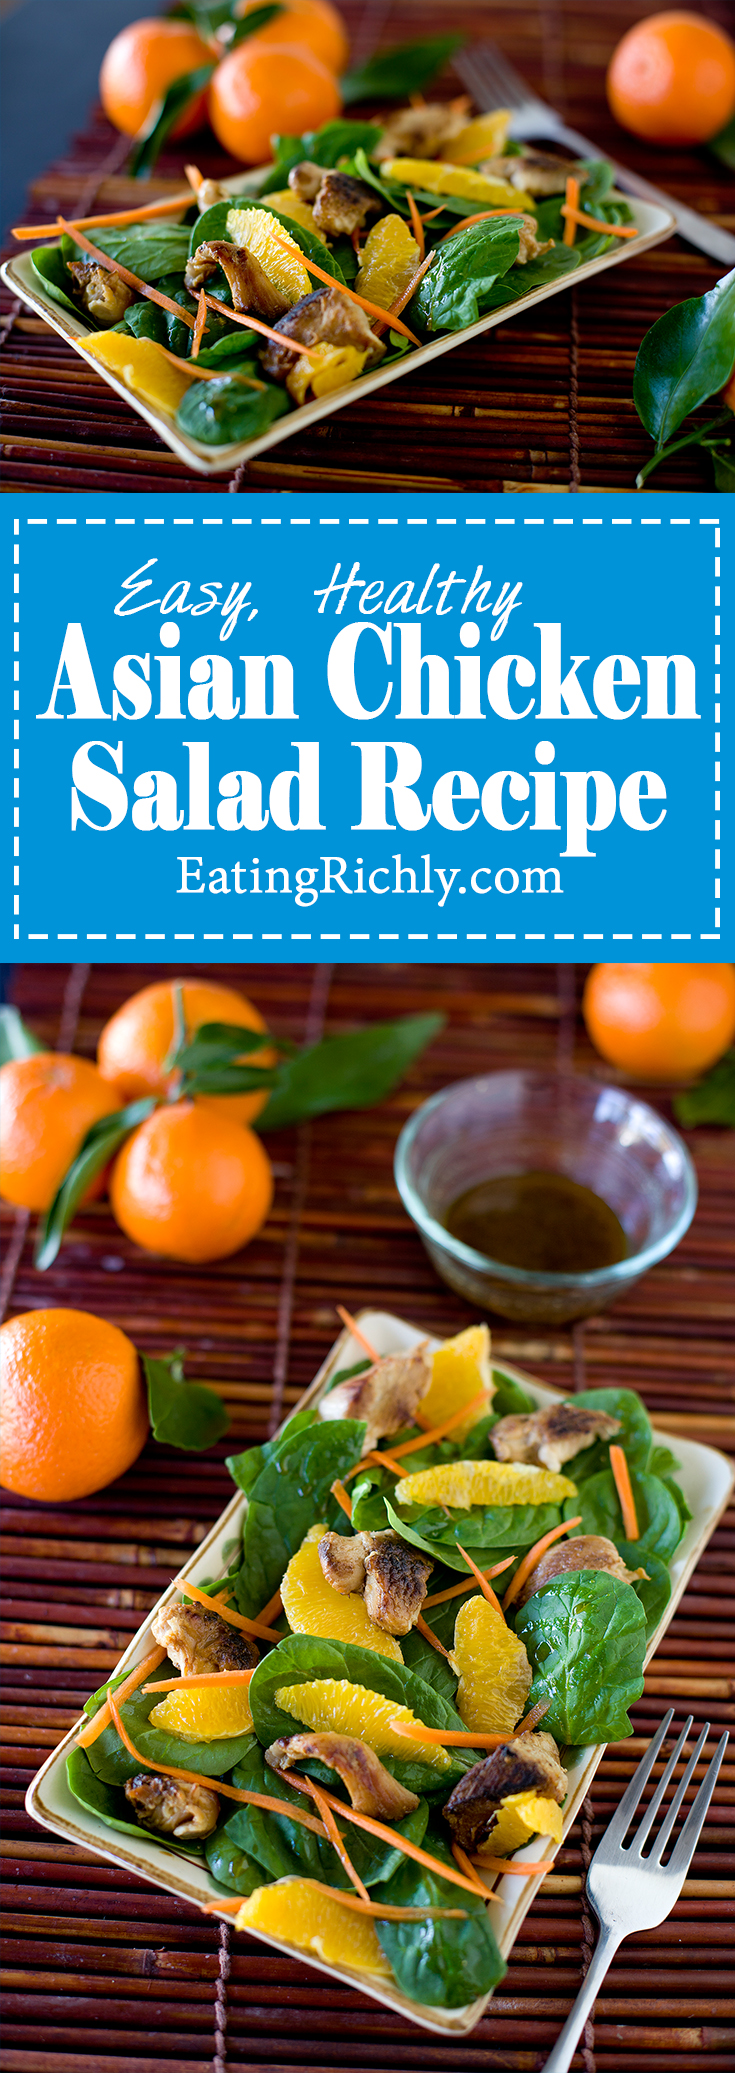 A fast and easy Asian chicken salad recipe that's actually good for you! EatingRichly.com